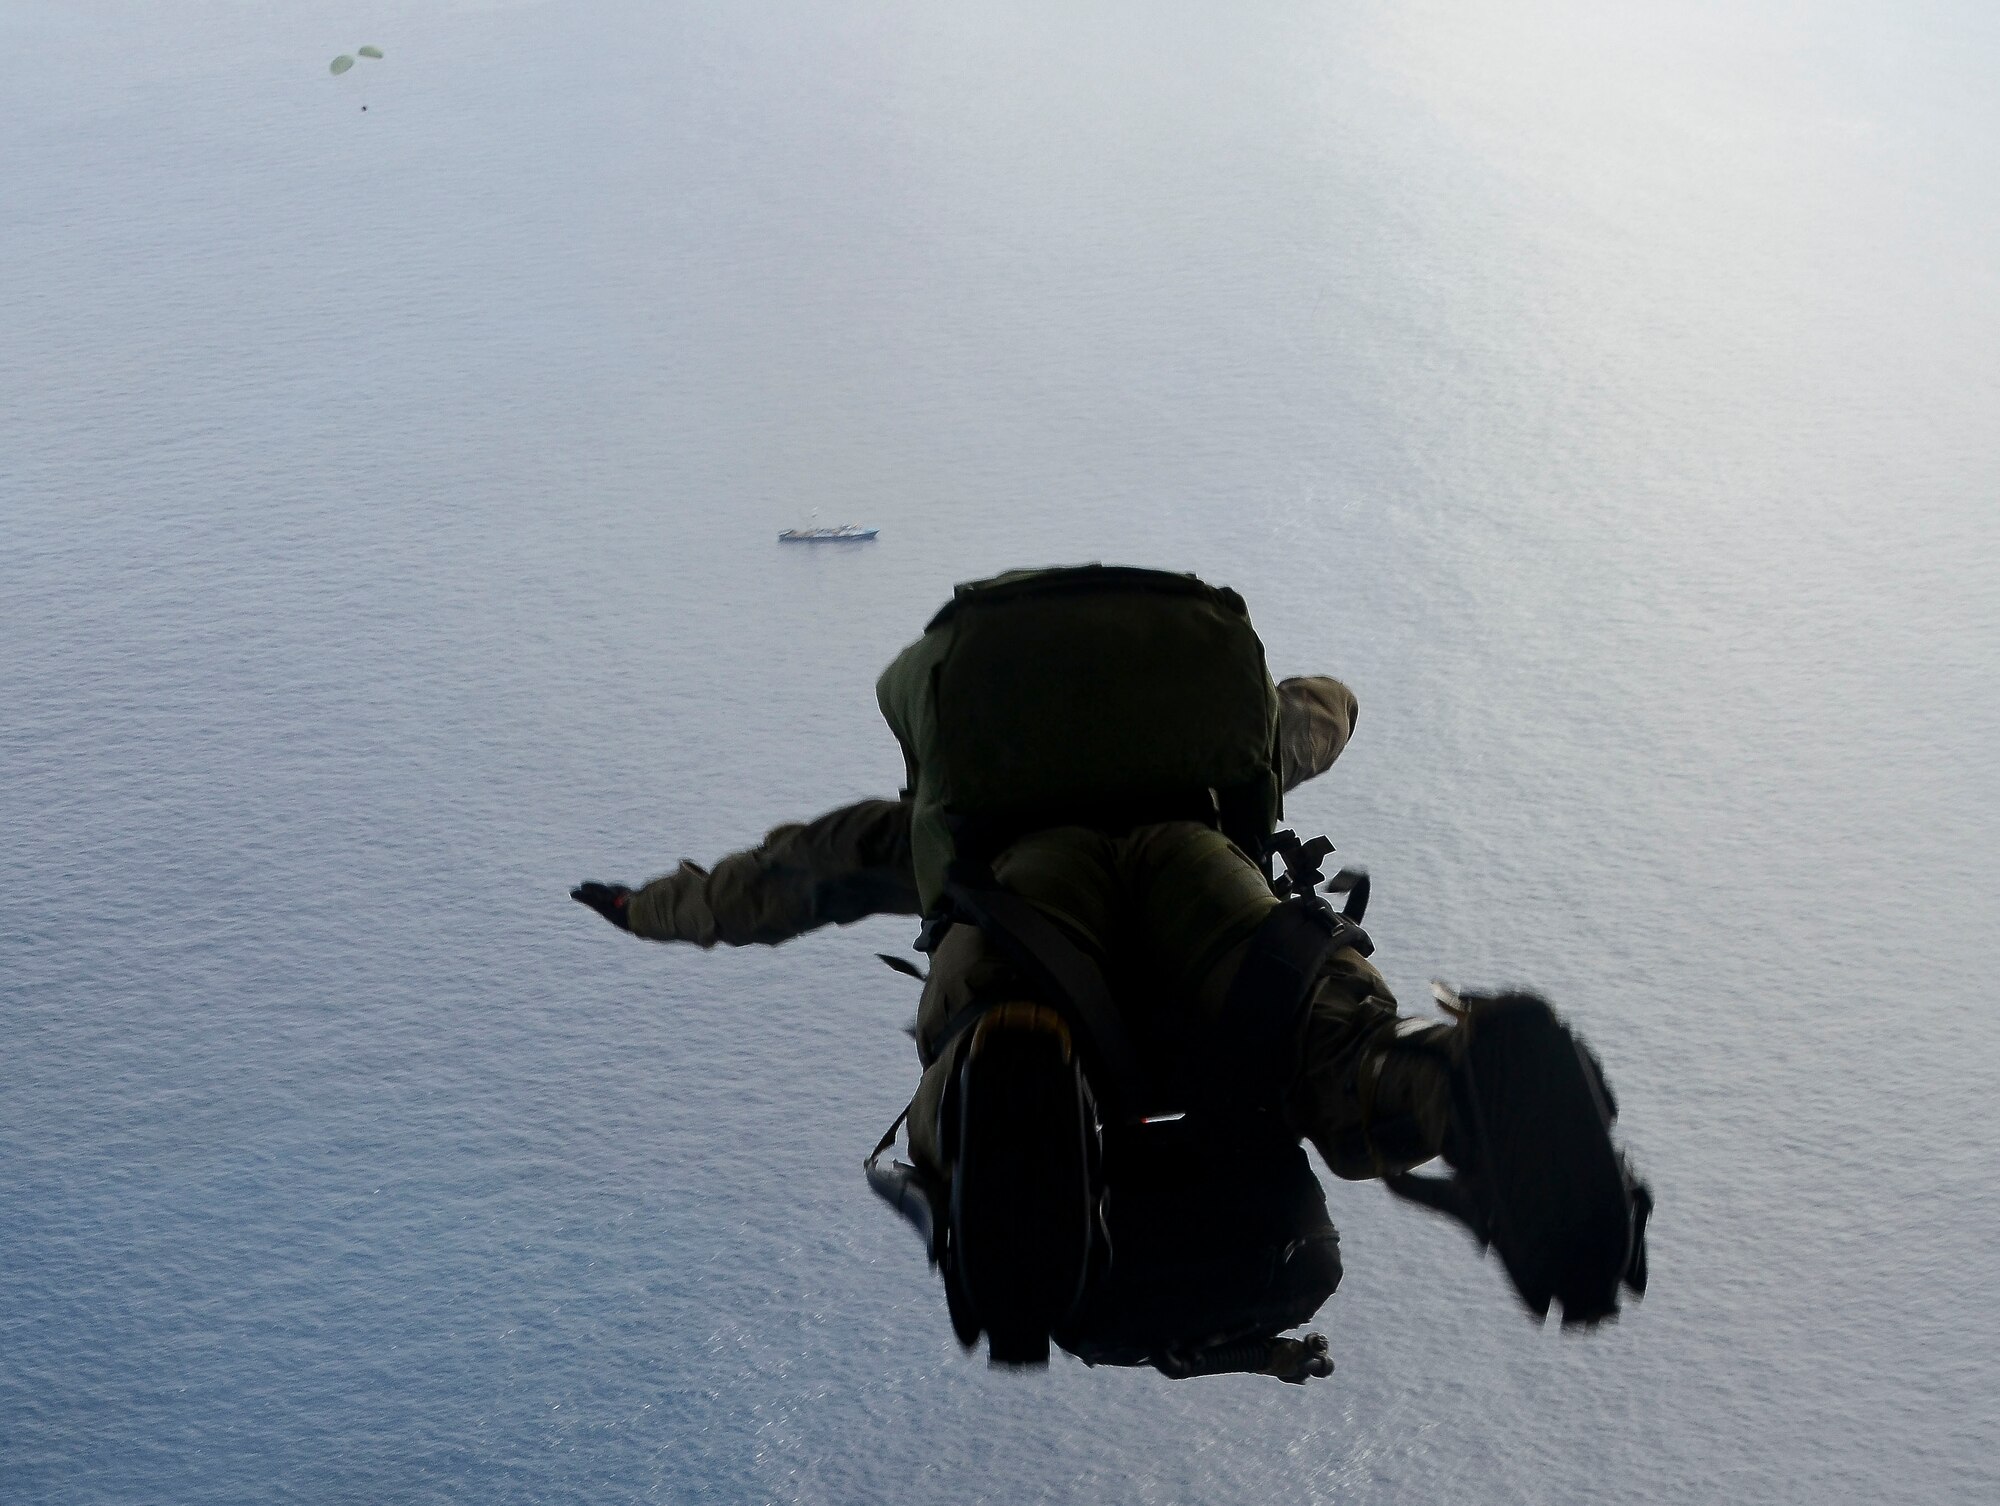 A U.S. Air Force pararescue Airman from the 48th Rescue Squadron parachutes into the Pacific Ocean to aid to two critically injured sailors aboard a Venezuelan fishing boat May 3, 2014. The Airmen flew in two HC-130J Combat King II aircraft and three HH-60 Pavehawk helicopters for nearly 11 hours, and then parachuted into the ocean 1,100 nautical miles from the Mexican coast with two inflatable zodiac boats and medical equipment to deliver lifesaving care. (U.S. Air Force photo by Staff Sgt. Adam Grant/Released) 